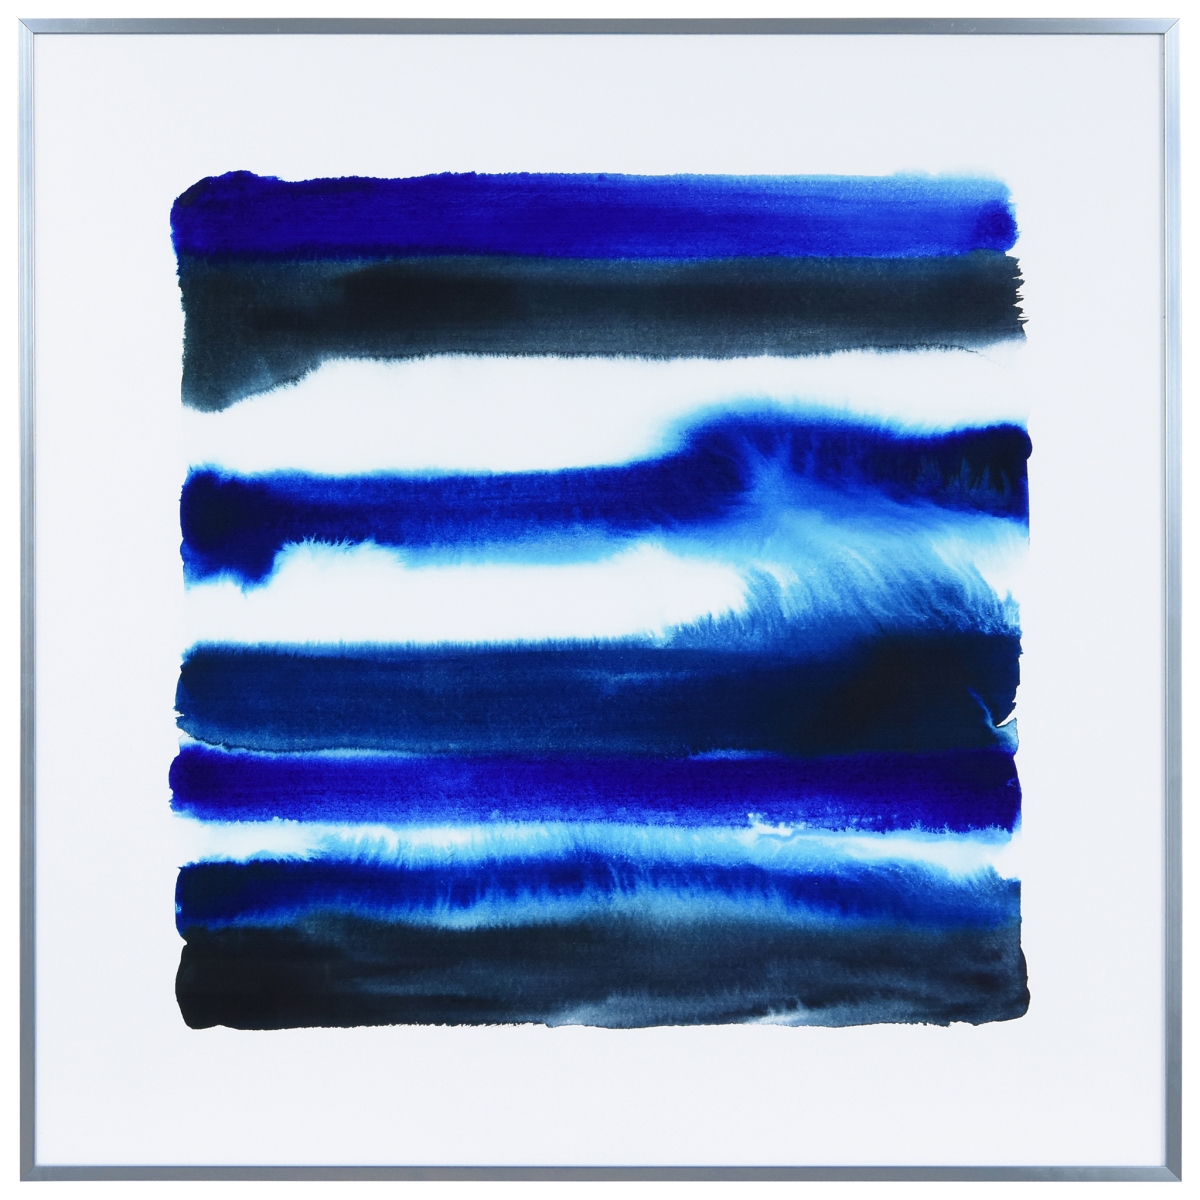 Aags-132795-2424 24 X 24 In. Blue Shorebreak Abstract B Reverse Printed Glass & Anodized Aluminum Silver Frame Contemporary Wall Art